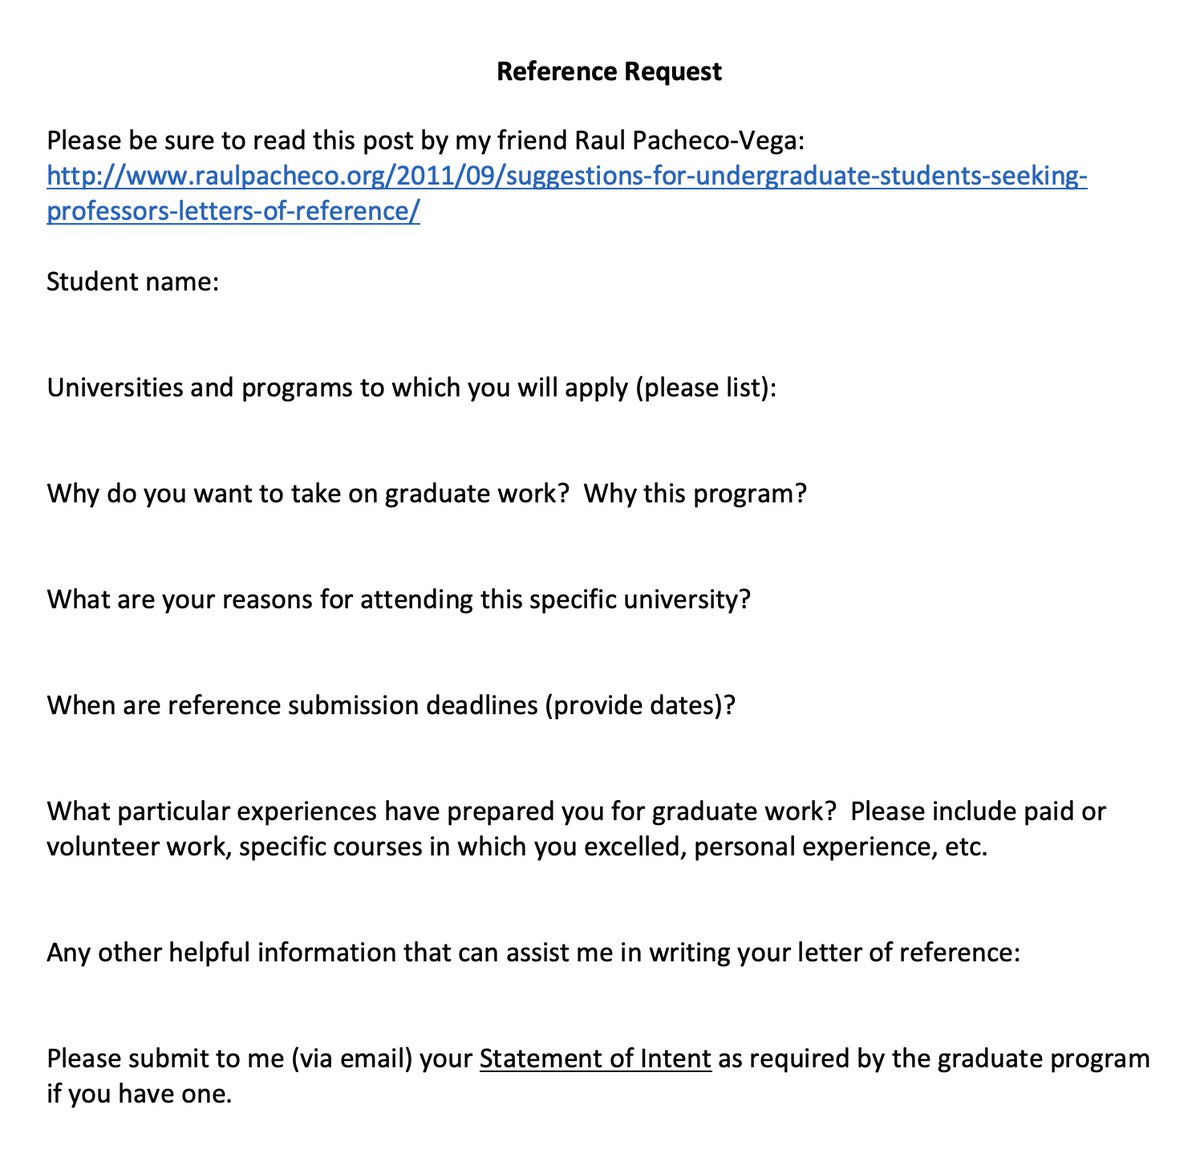 When I got overwhelmed with requests for letters of reference for graduate studies, I created a form that I ask students to complete so that I can write a great letter. Here's mine -- adapt and use as you like!